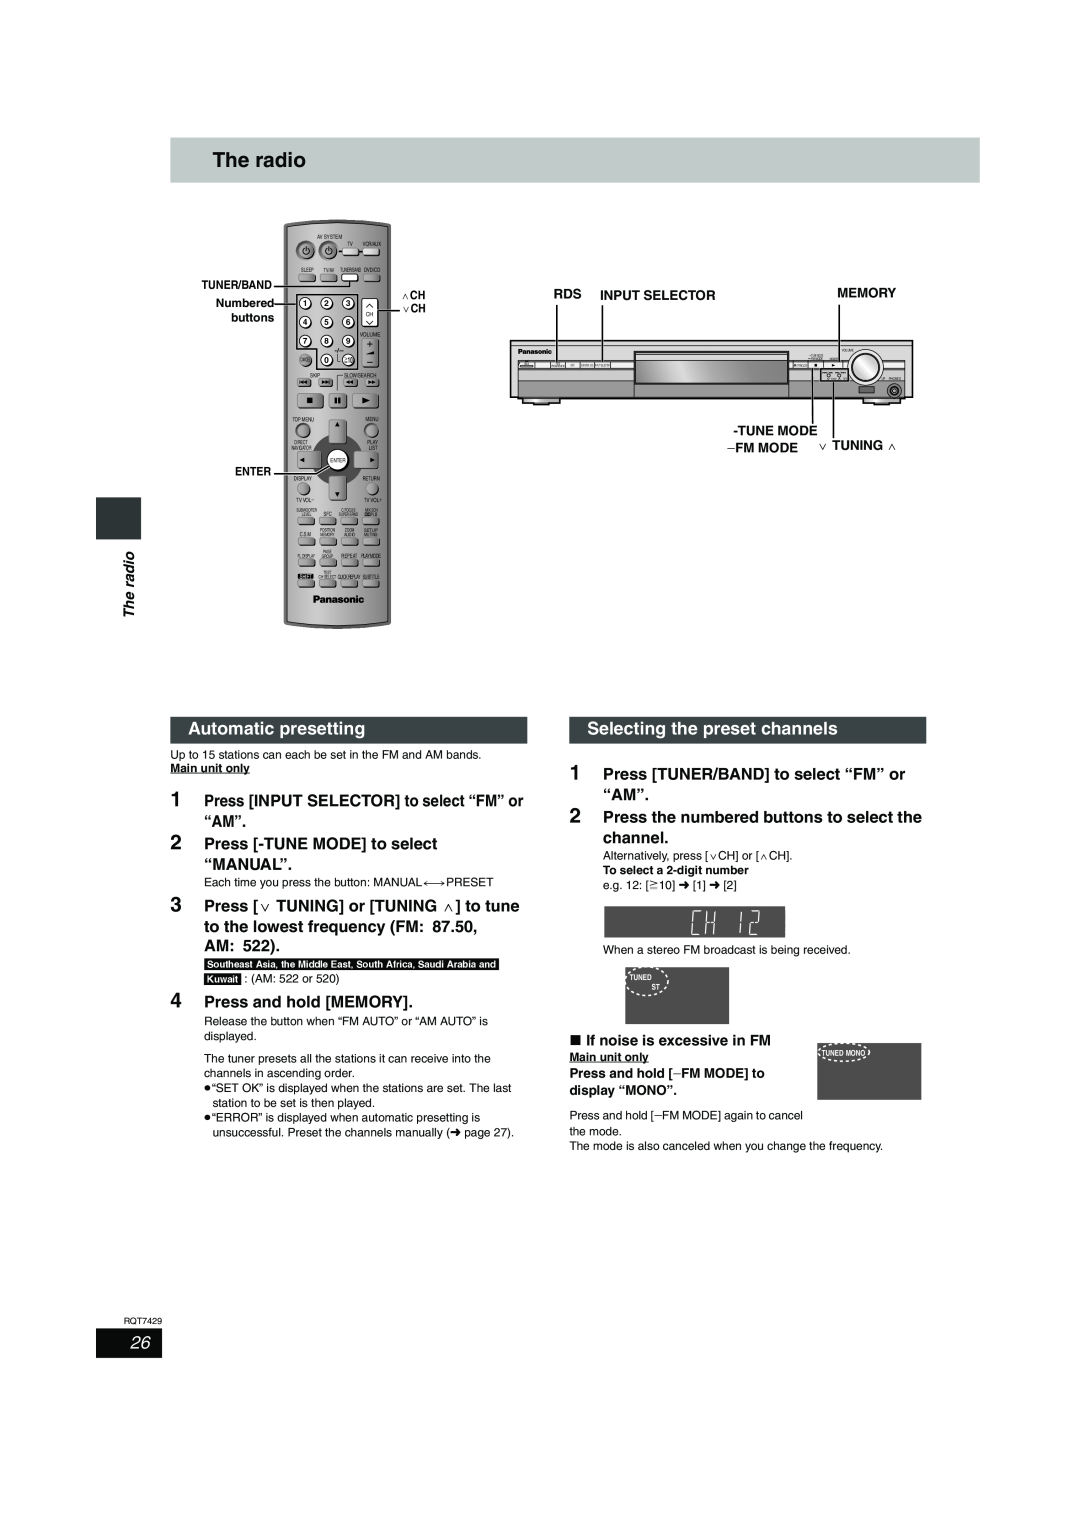 Panasonic SC-HT520 The radio, Automatic presetting, Selecting the preset channels, 2Press -TUNEMODE to select “MANUAL” 